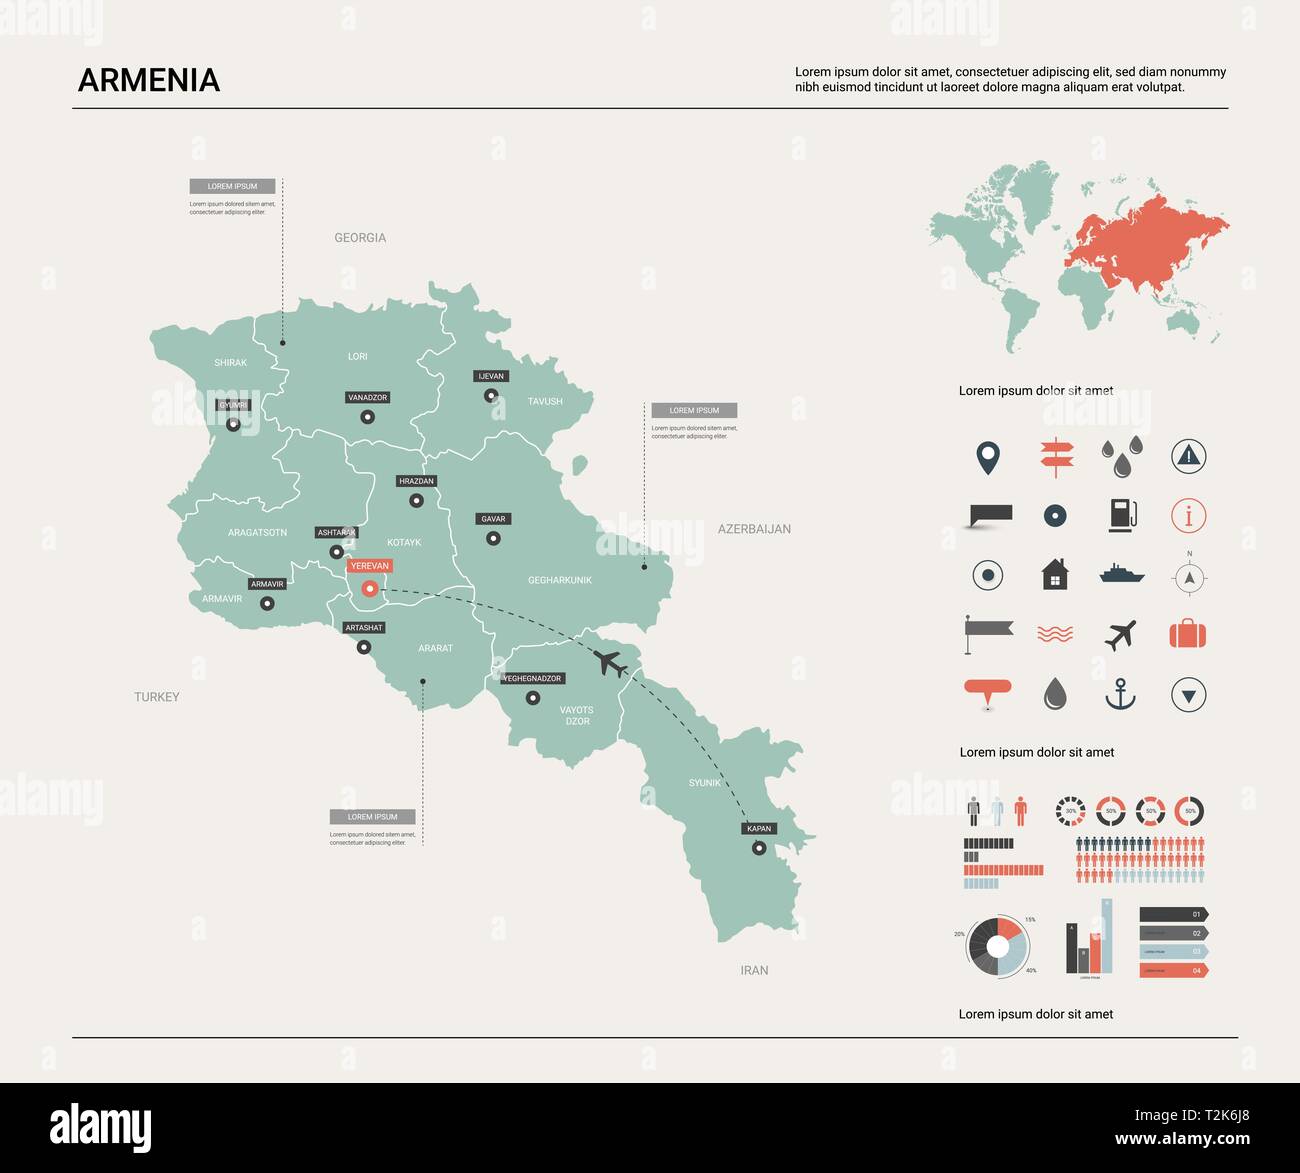 Armenia higt detailed map with subdivisions Vector Image